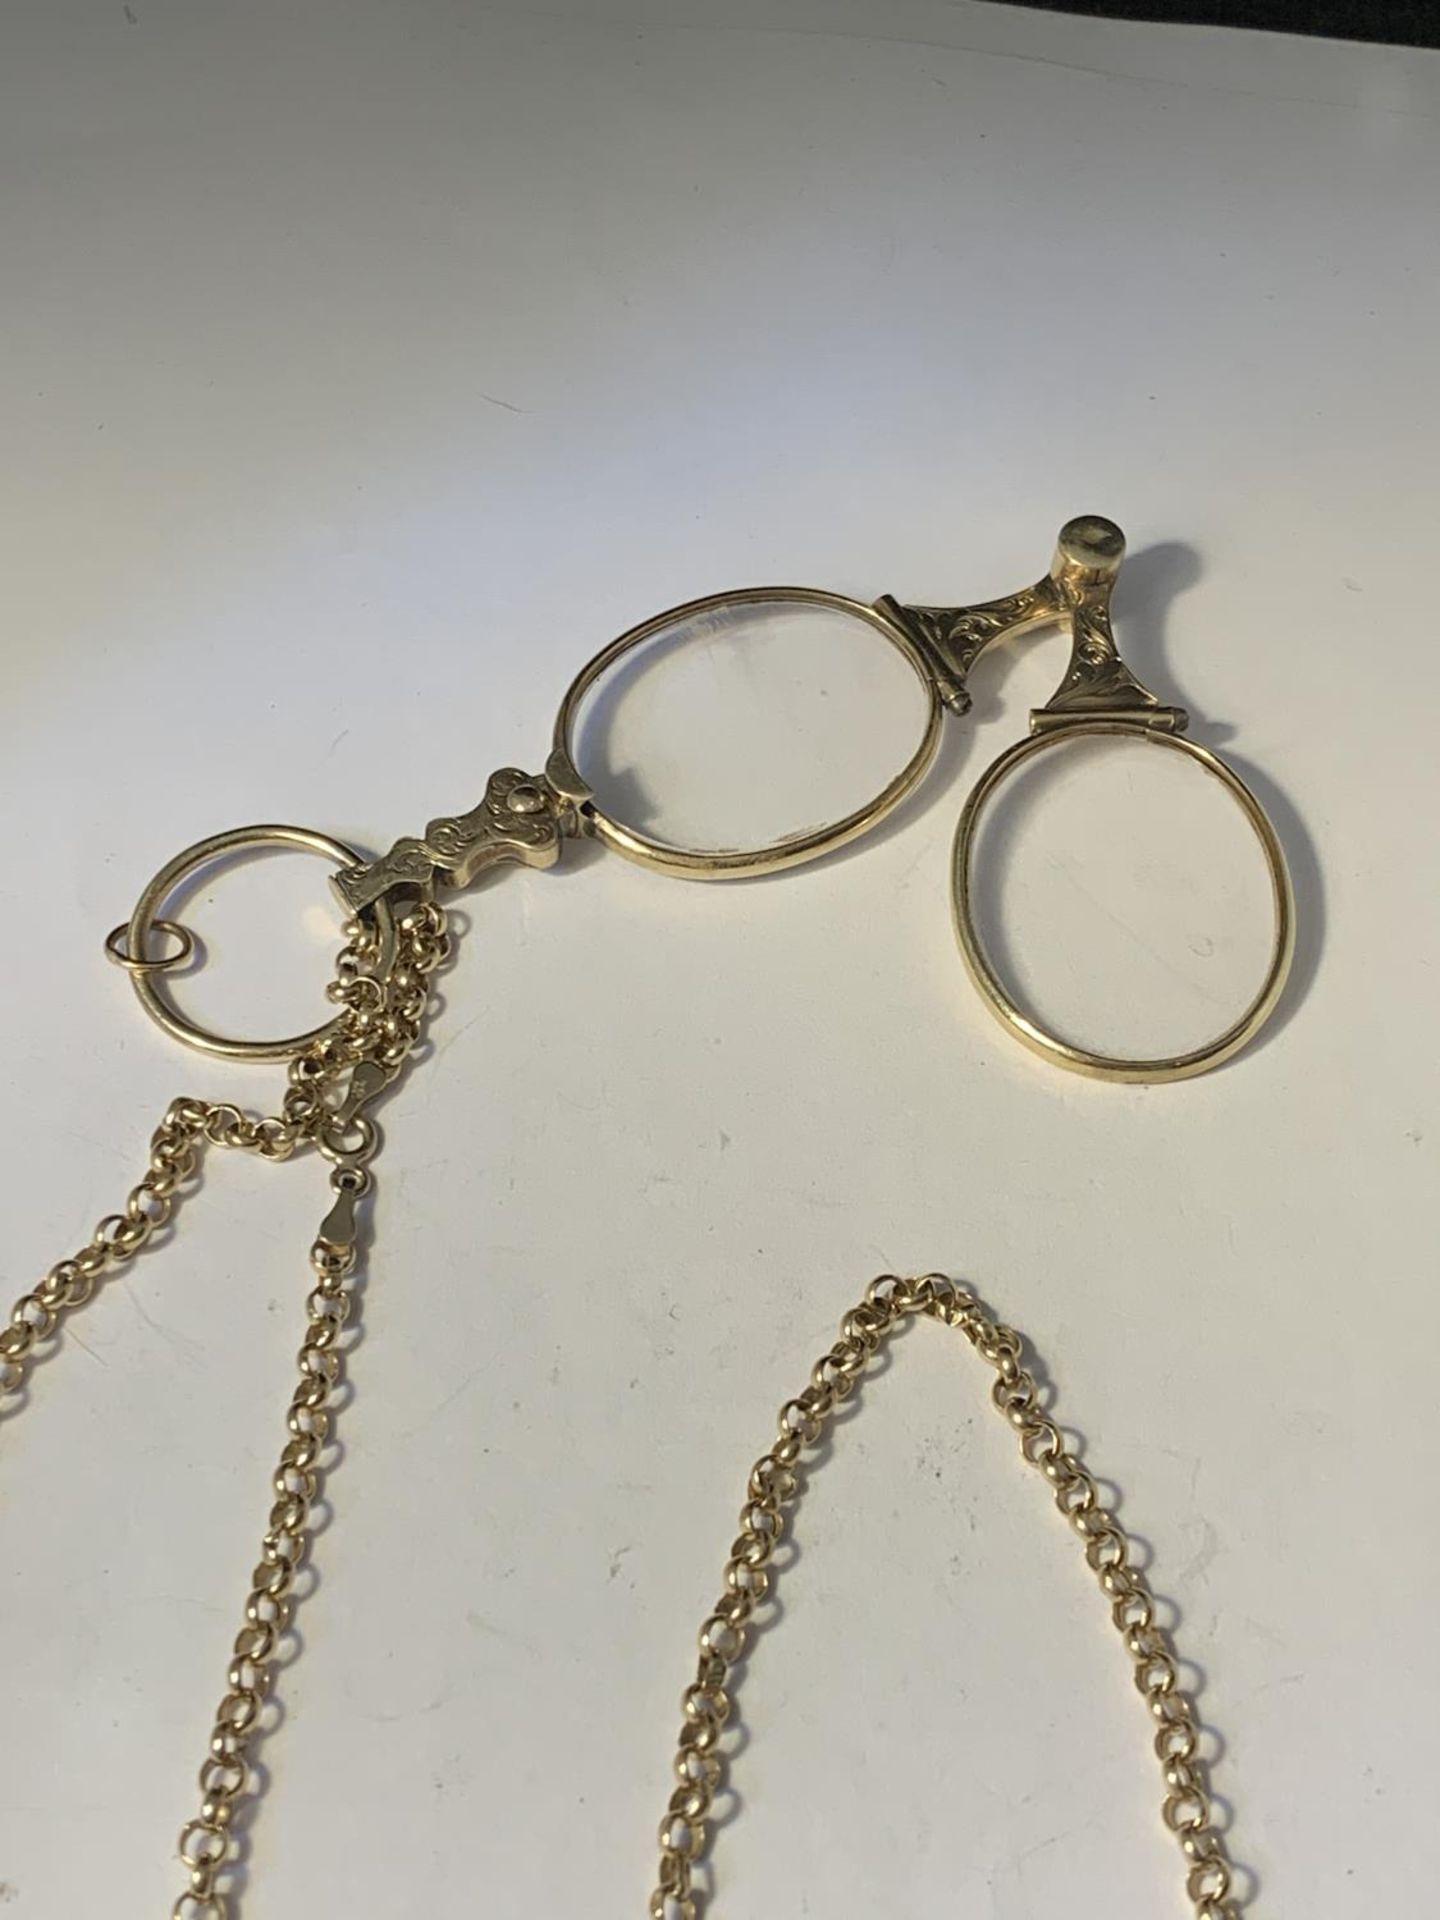 A 9 CARAT GOLD CHAIN GROSS WEIGHT 4.29 GRAMS WITH A PAIR OF GOLD PLATED ORNATE PINCE NEZ - Image 4 of 5